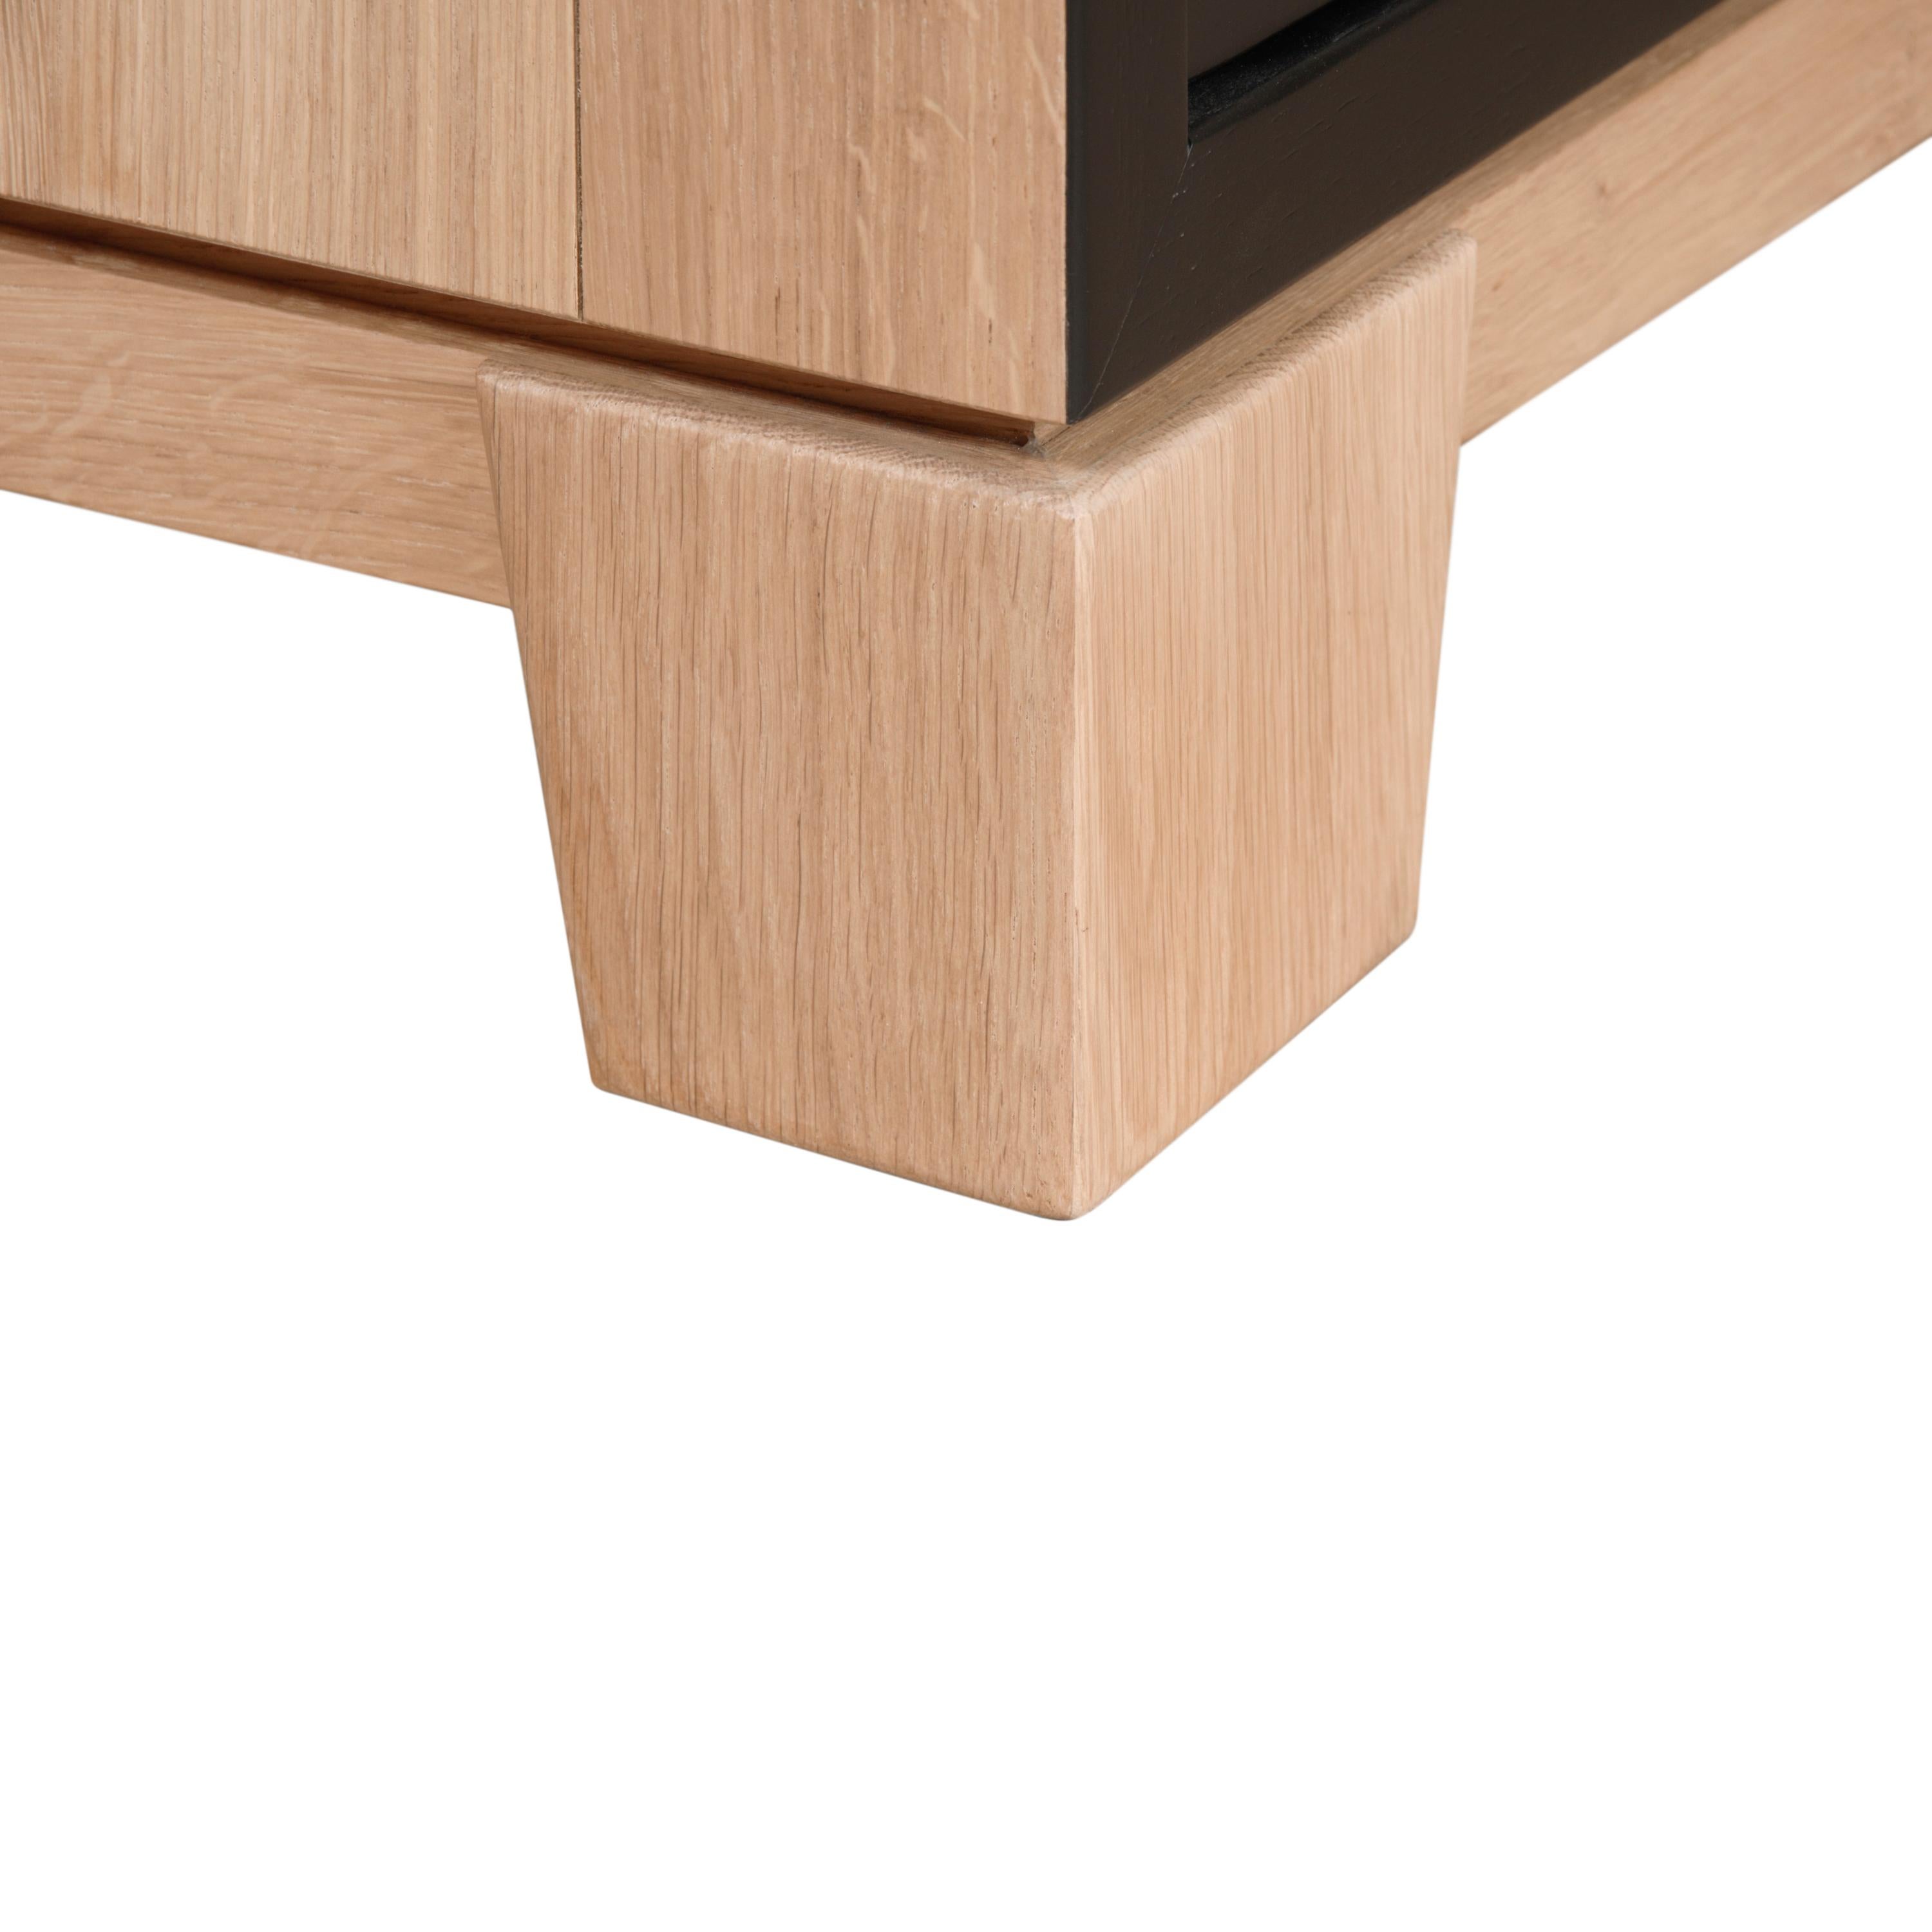 Modern 3 Doors Sideboard in Oak, Matt Black Lacquered Front and Inside, Made in France For Sale